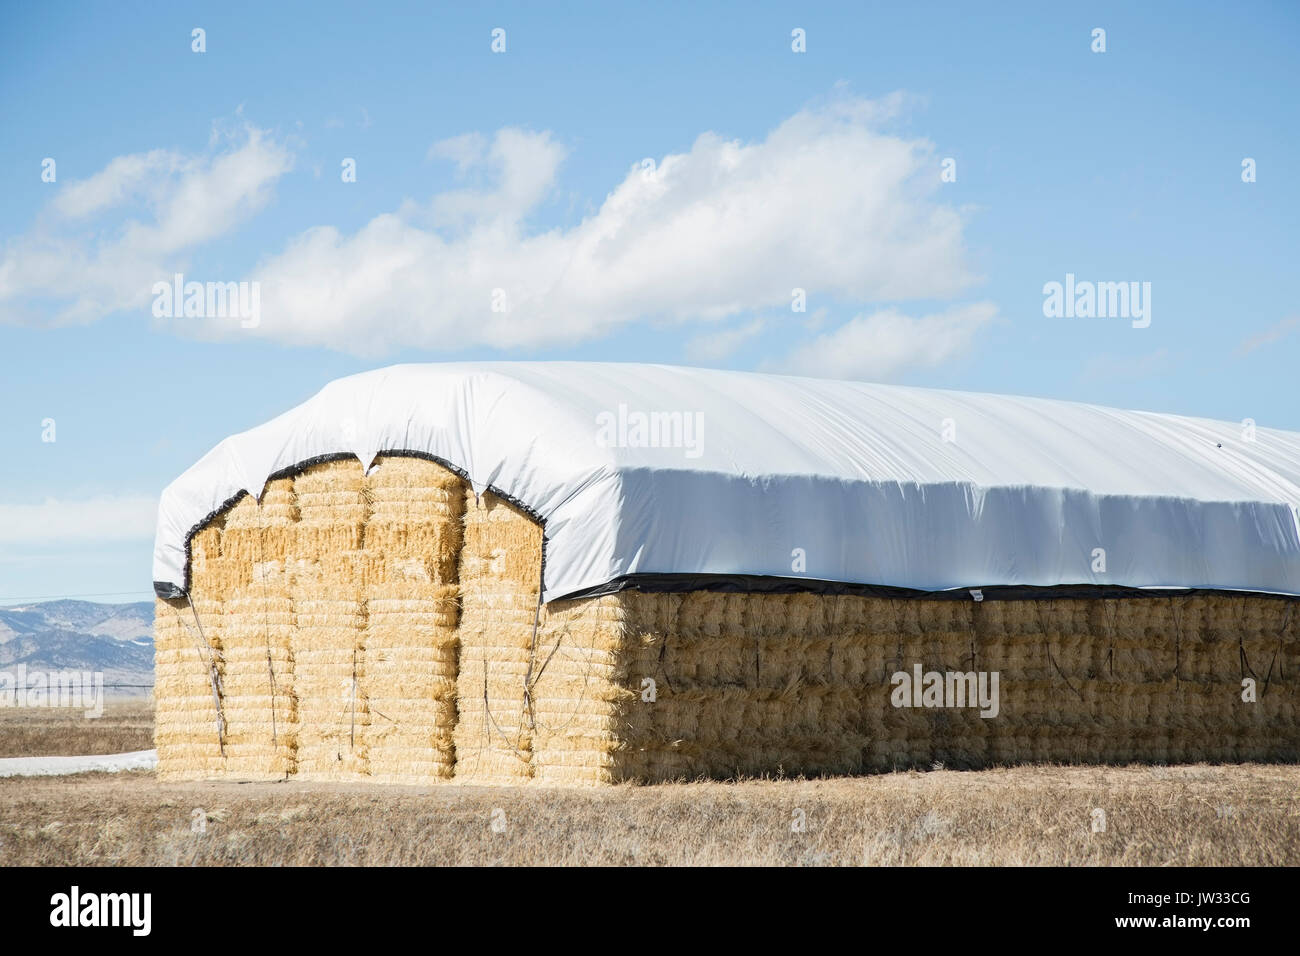 USA, Colorado, Stack of hay covered with tarpaulin Stock Photo